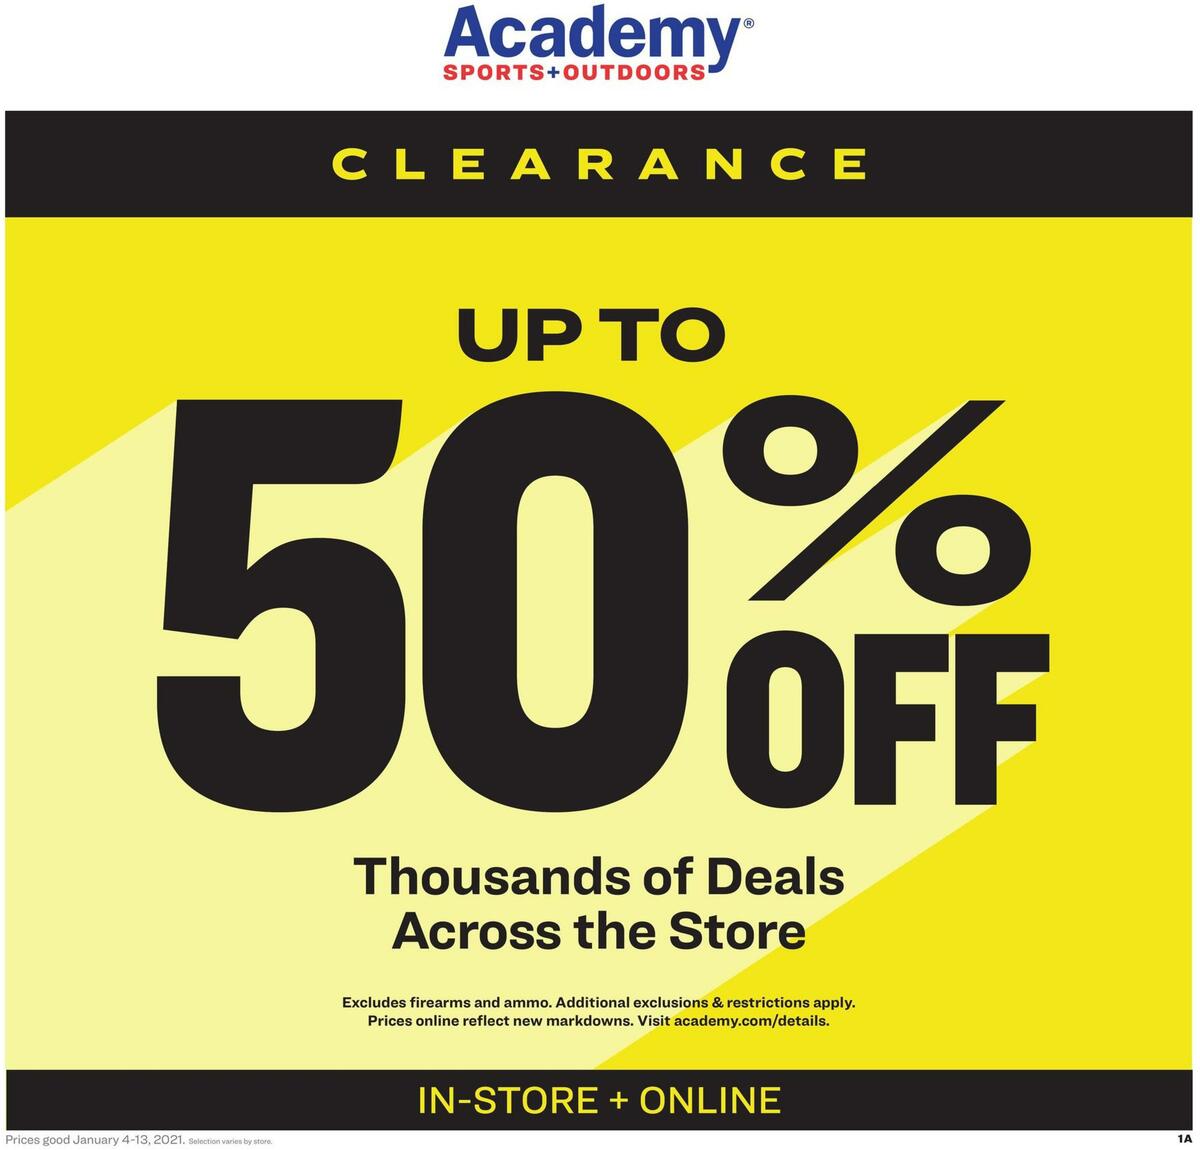 Academy Sports + Outdoors Weekly Ad from January 4